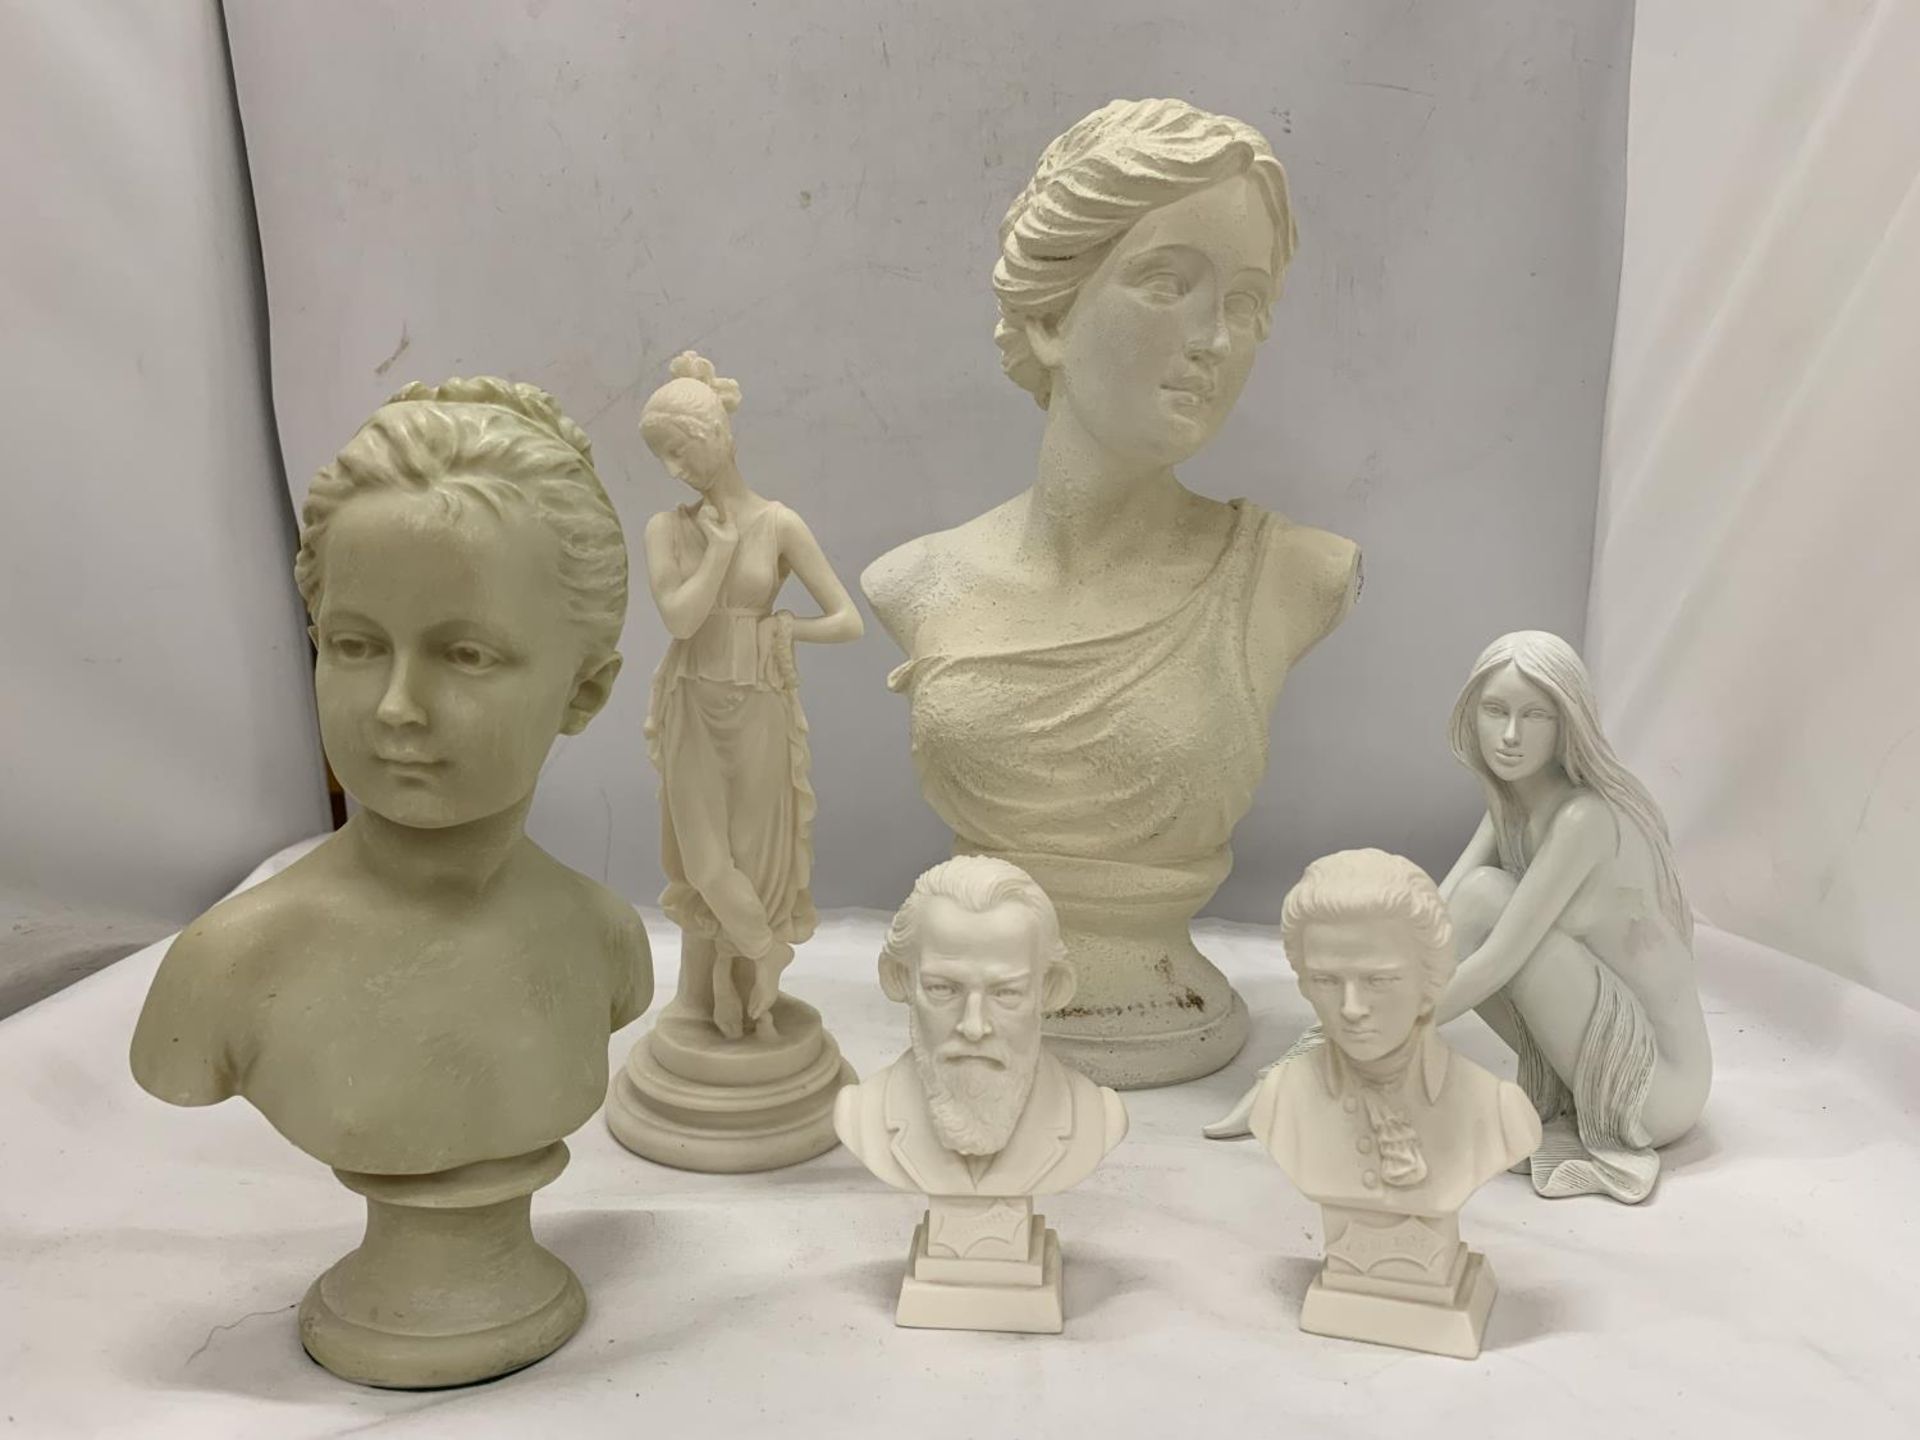 FOUR BUSTS OF FIGURES PLUS TWO LADY FIGURINES - Image 2 of 3